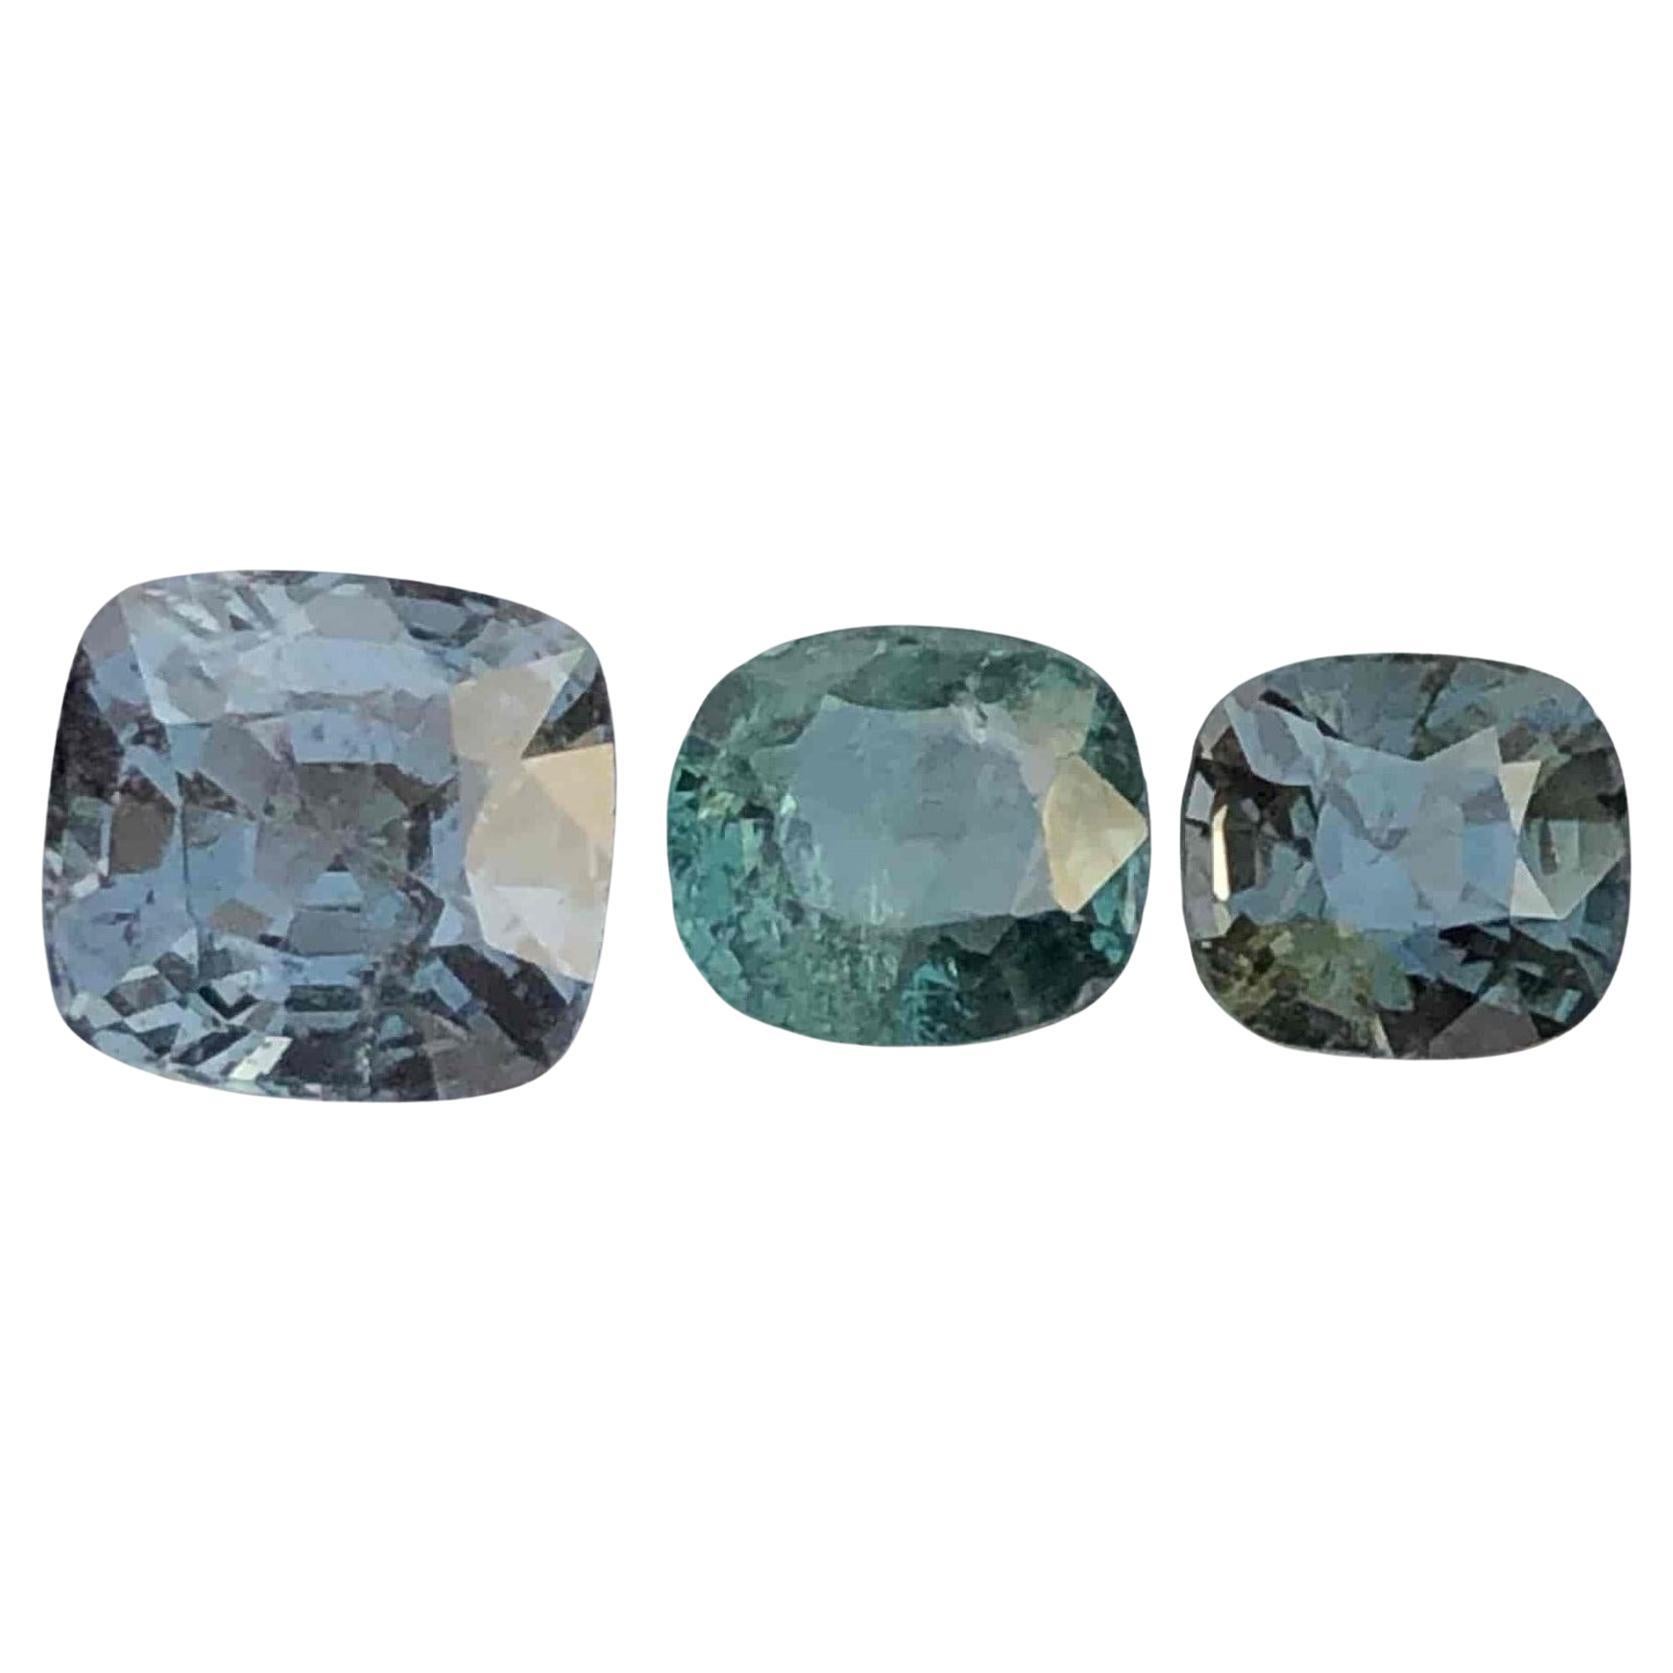 3.64 Carats Natural Gray Spinel Stones Batch Loose Gemstones From Burma